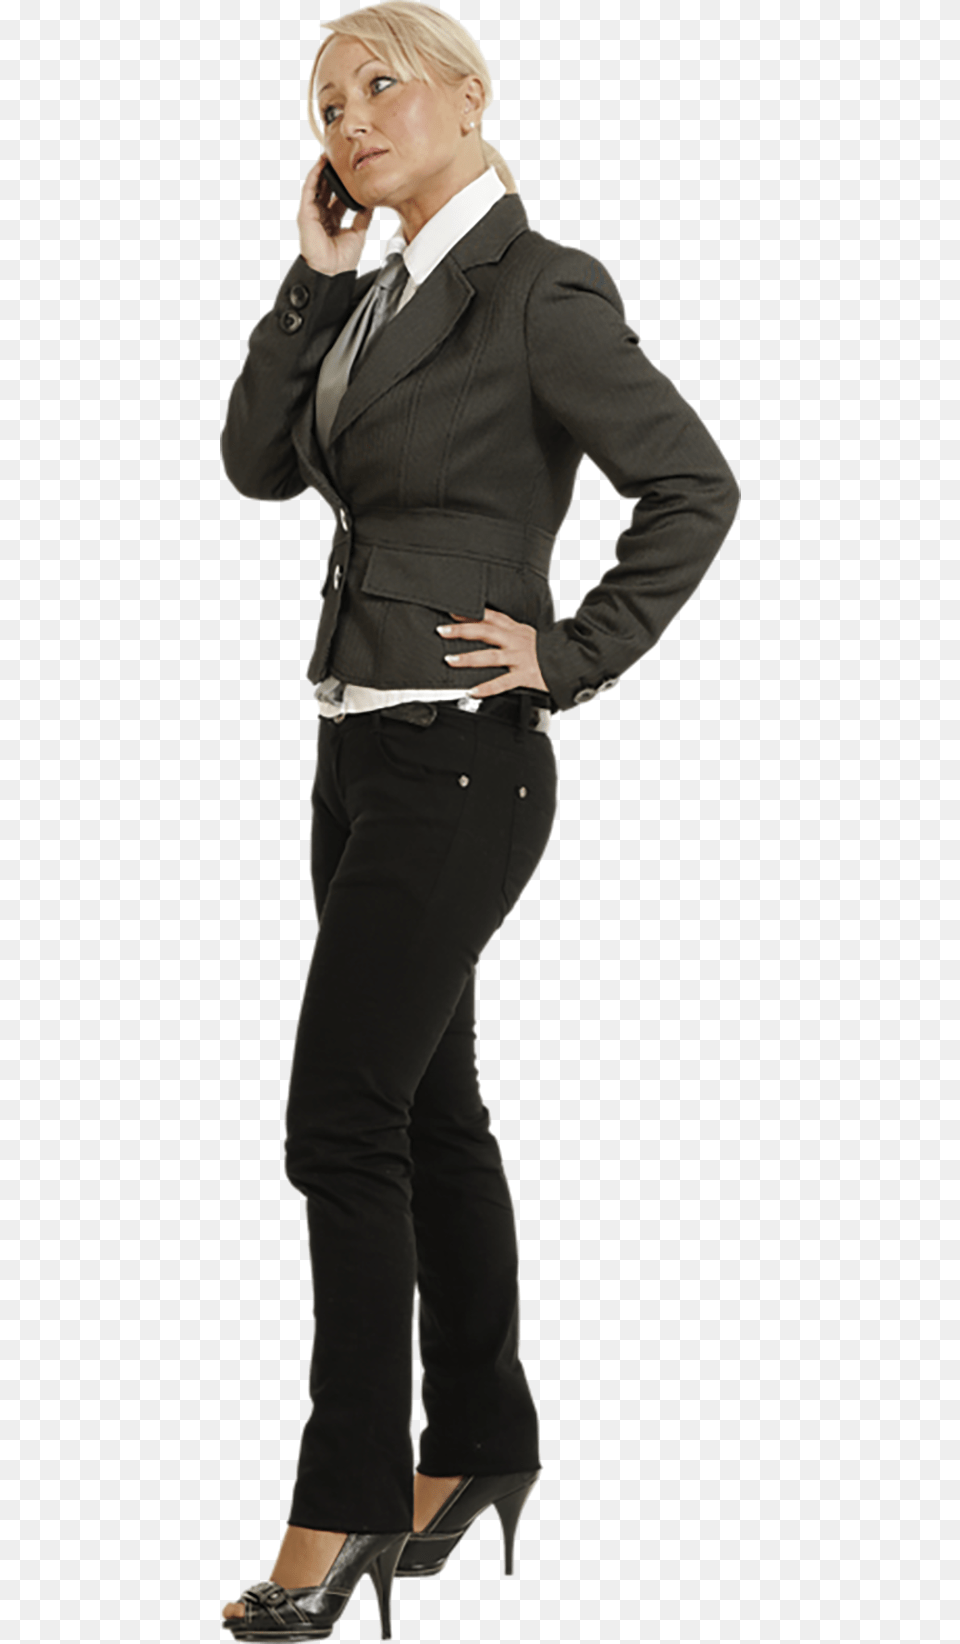 Cut Out People, Accessories, Tie, Suit, Sleeve Png Image